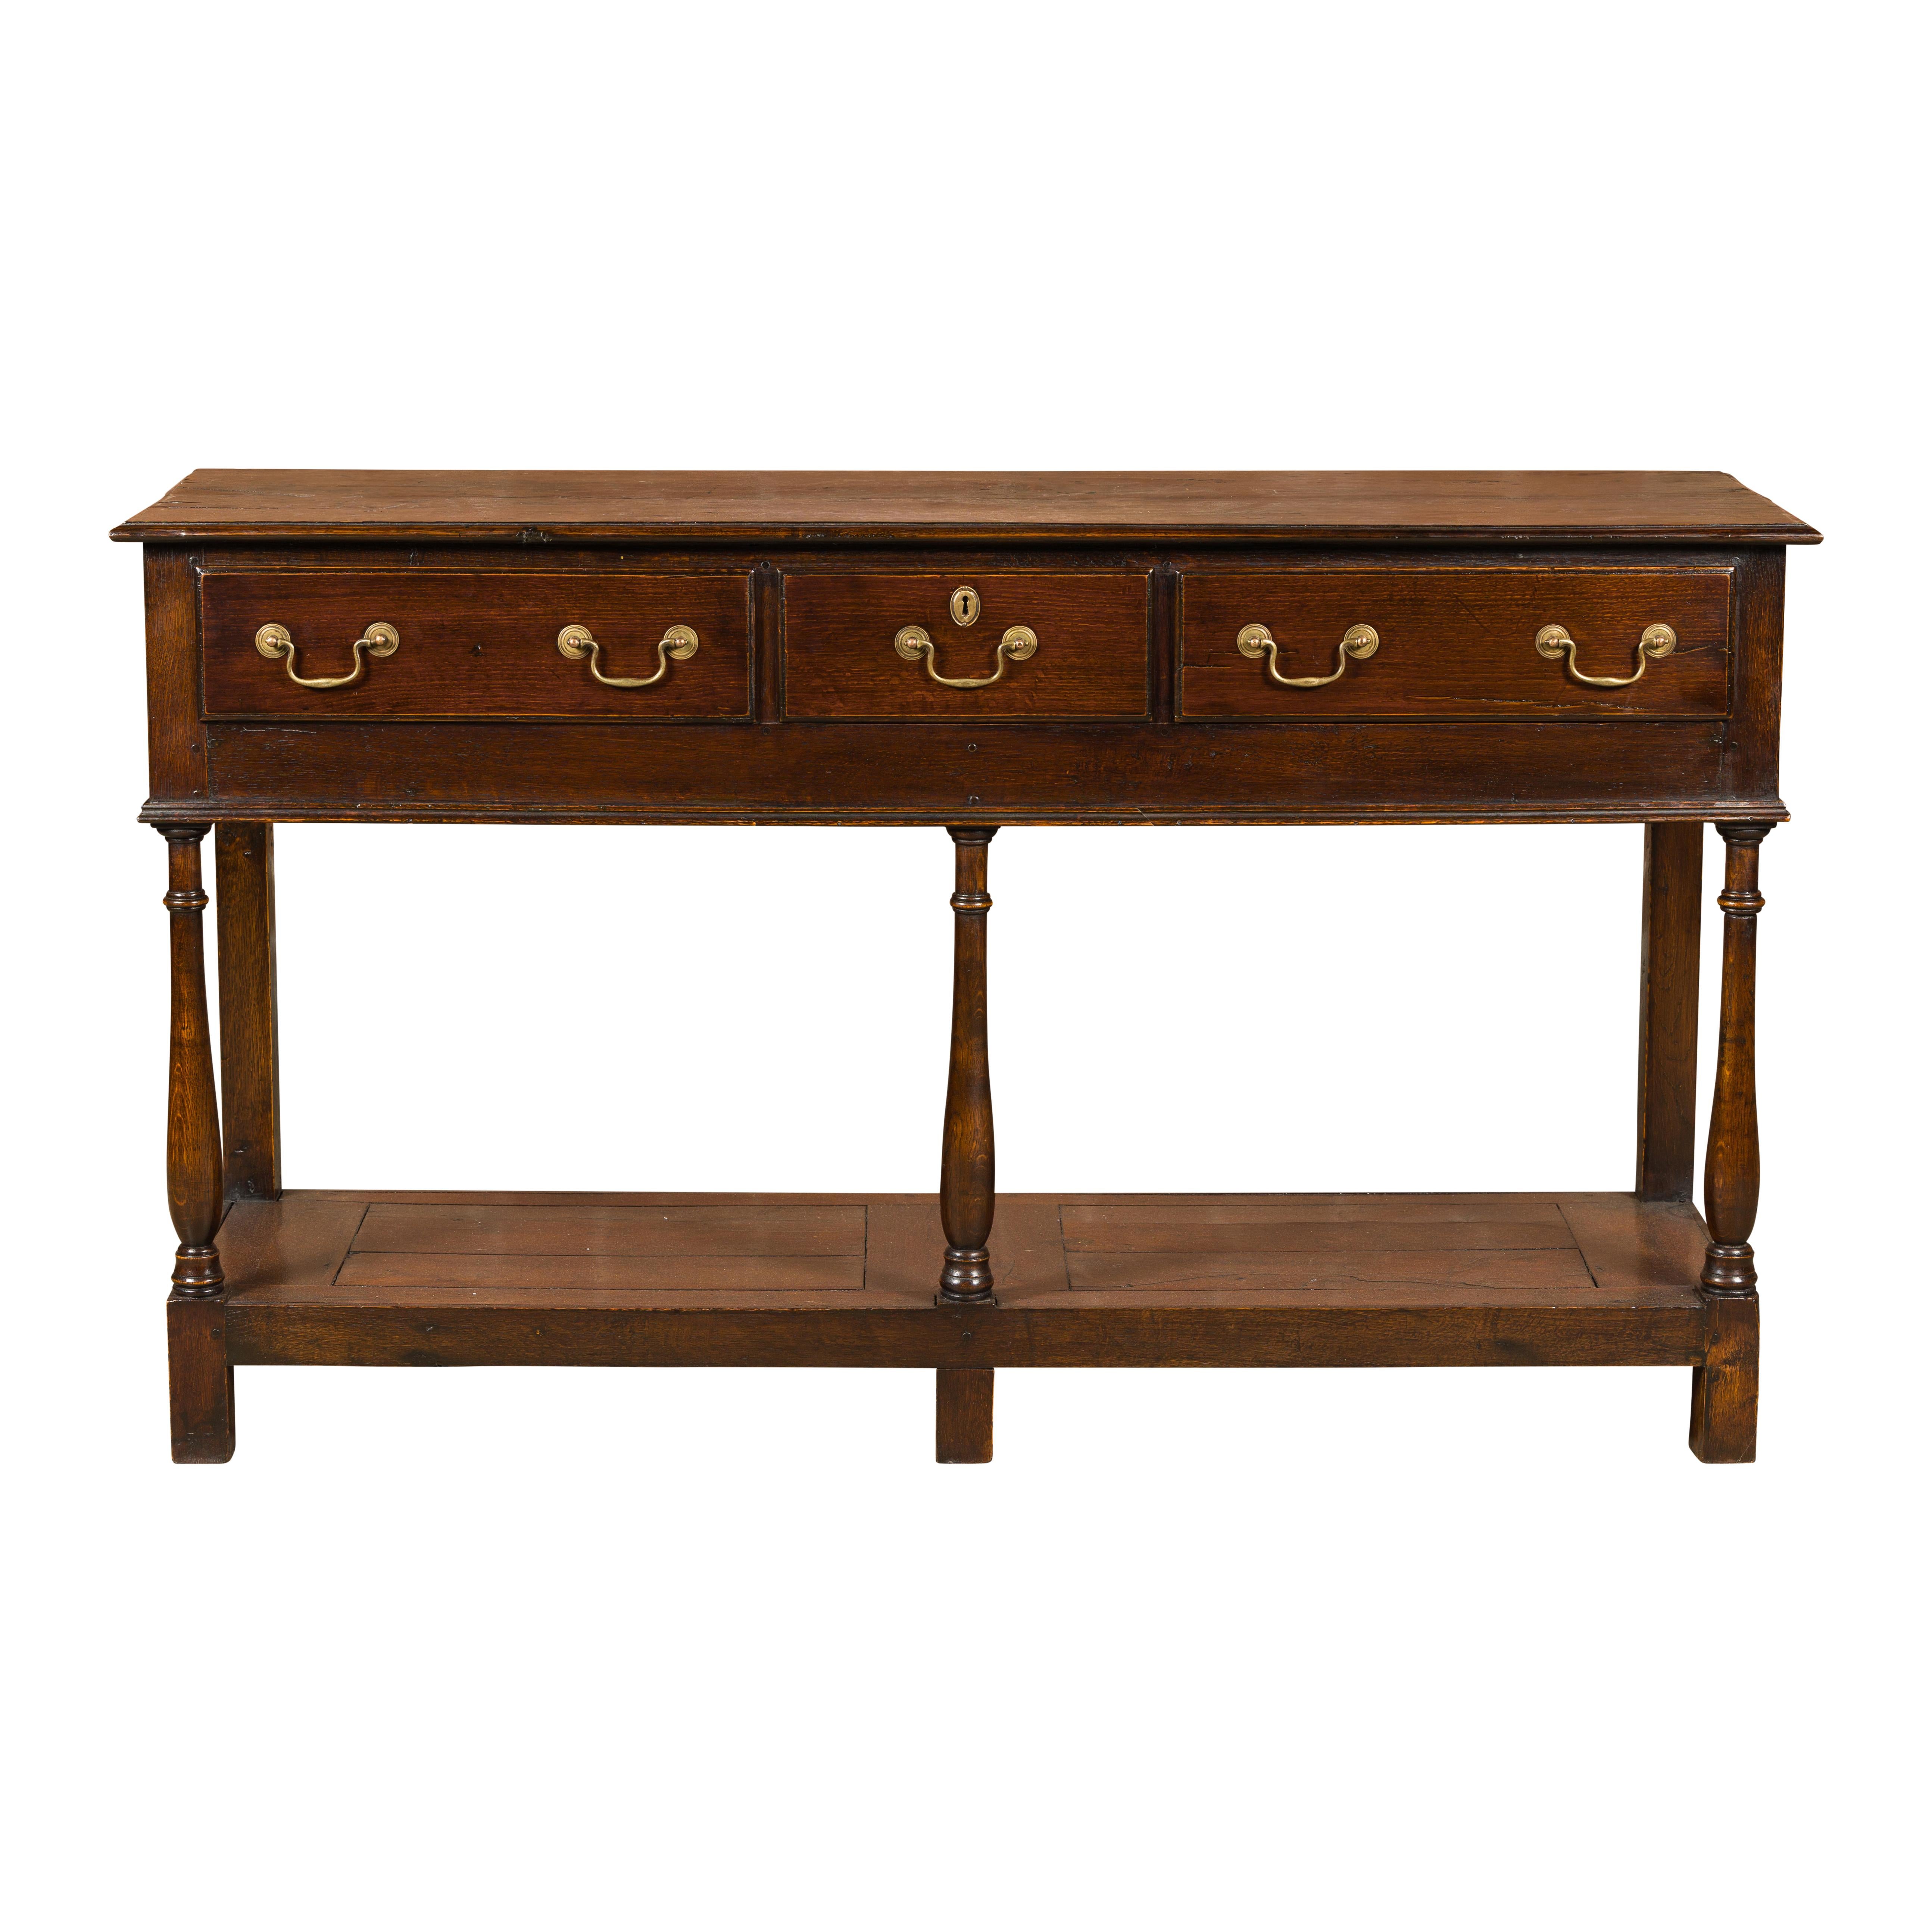 English 19th Century Oak Dresser Base with Three Drawers and Baluster Legs For Sale 13